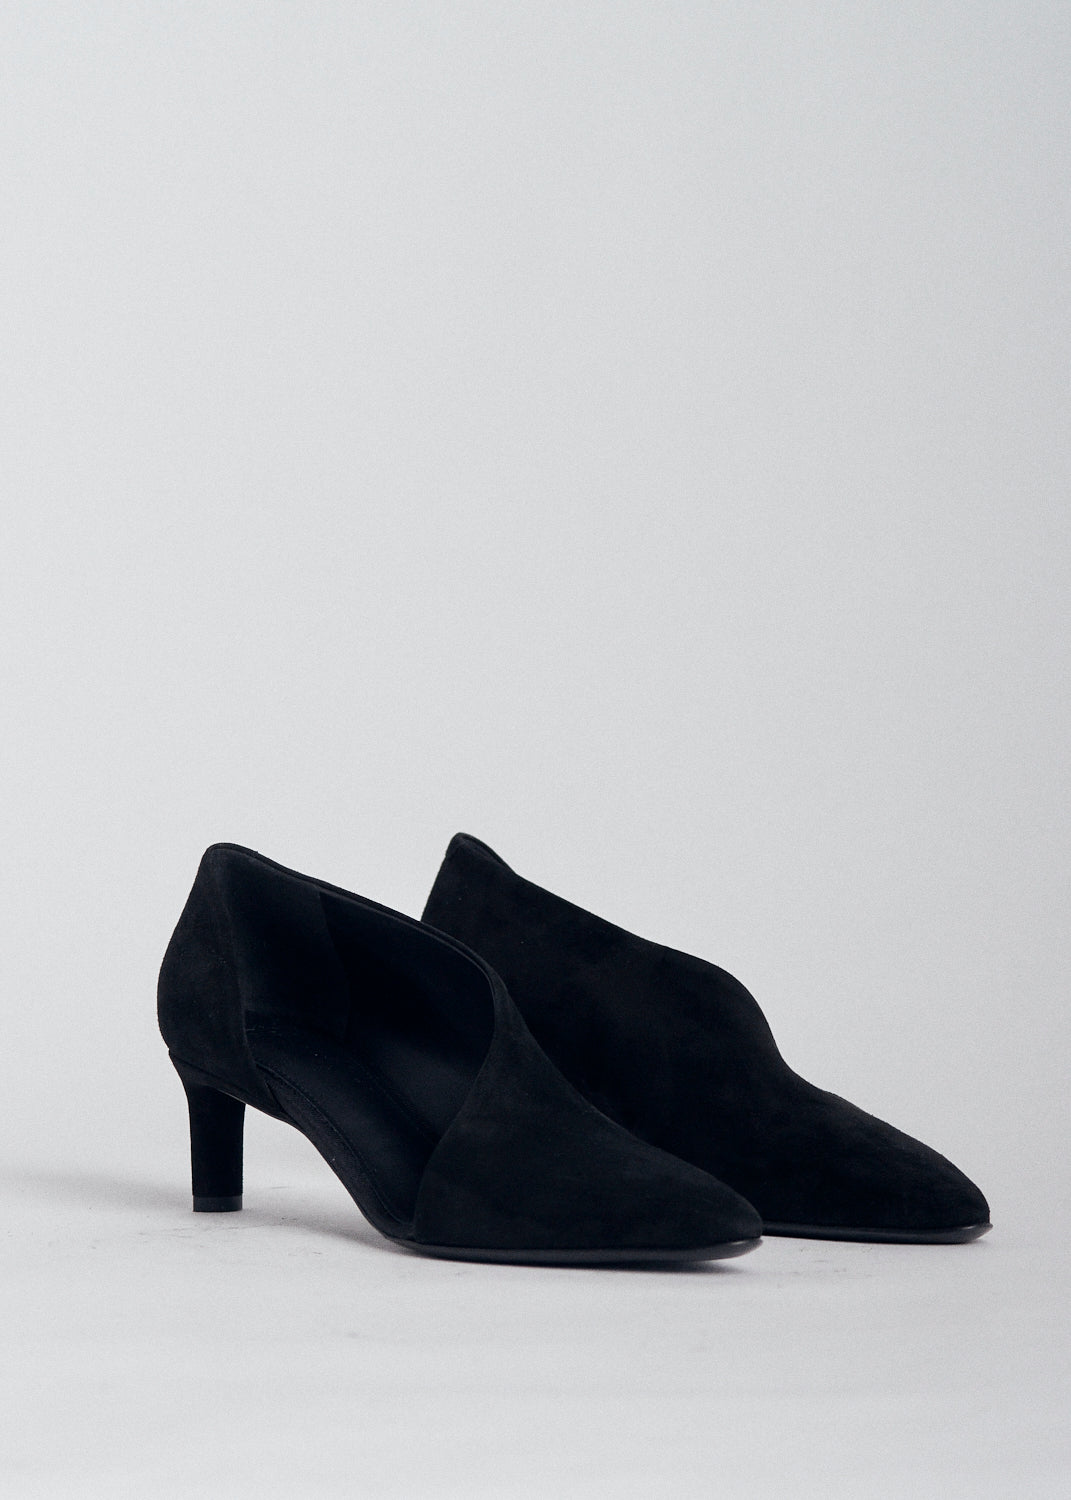 Asymmetric Pump in Suede - Black - CO Collections